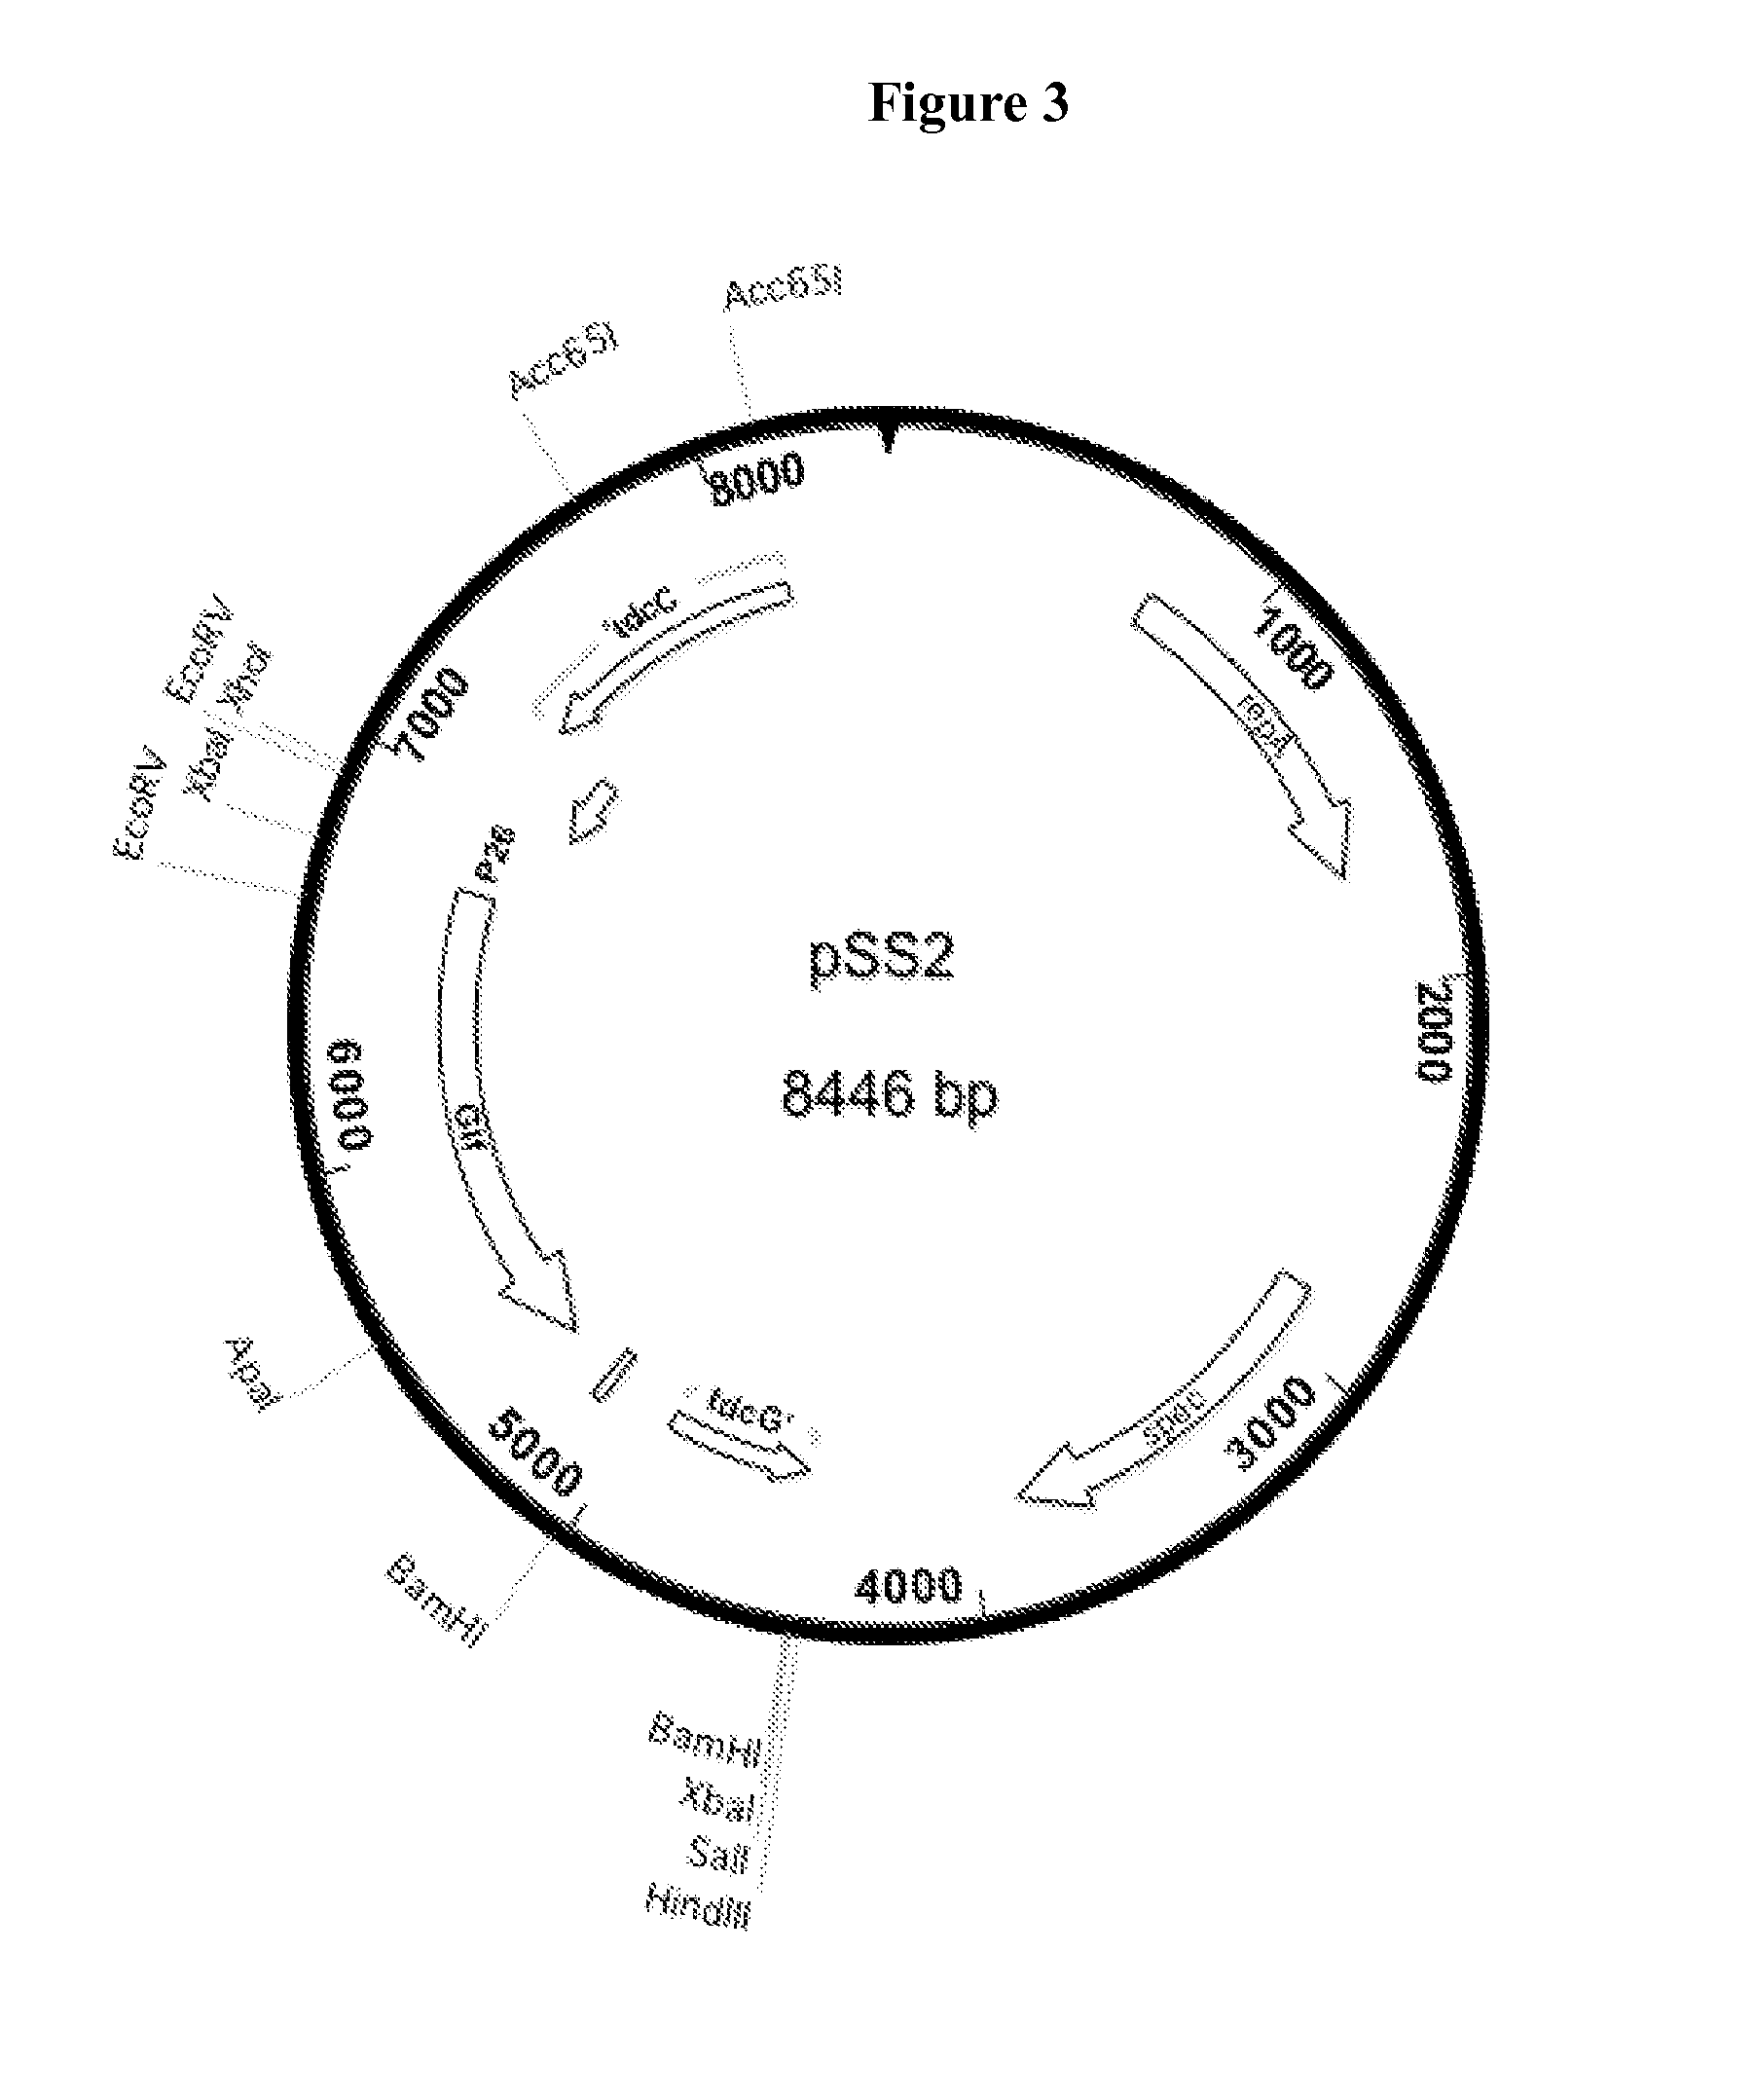 Method of producing succinic acid and other chemiclas using facilitated diffusion for sugar import